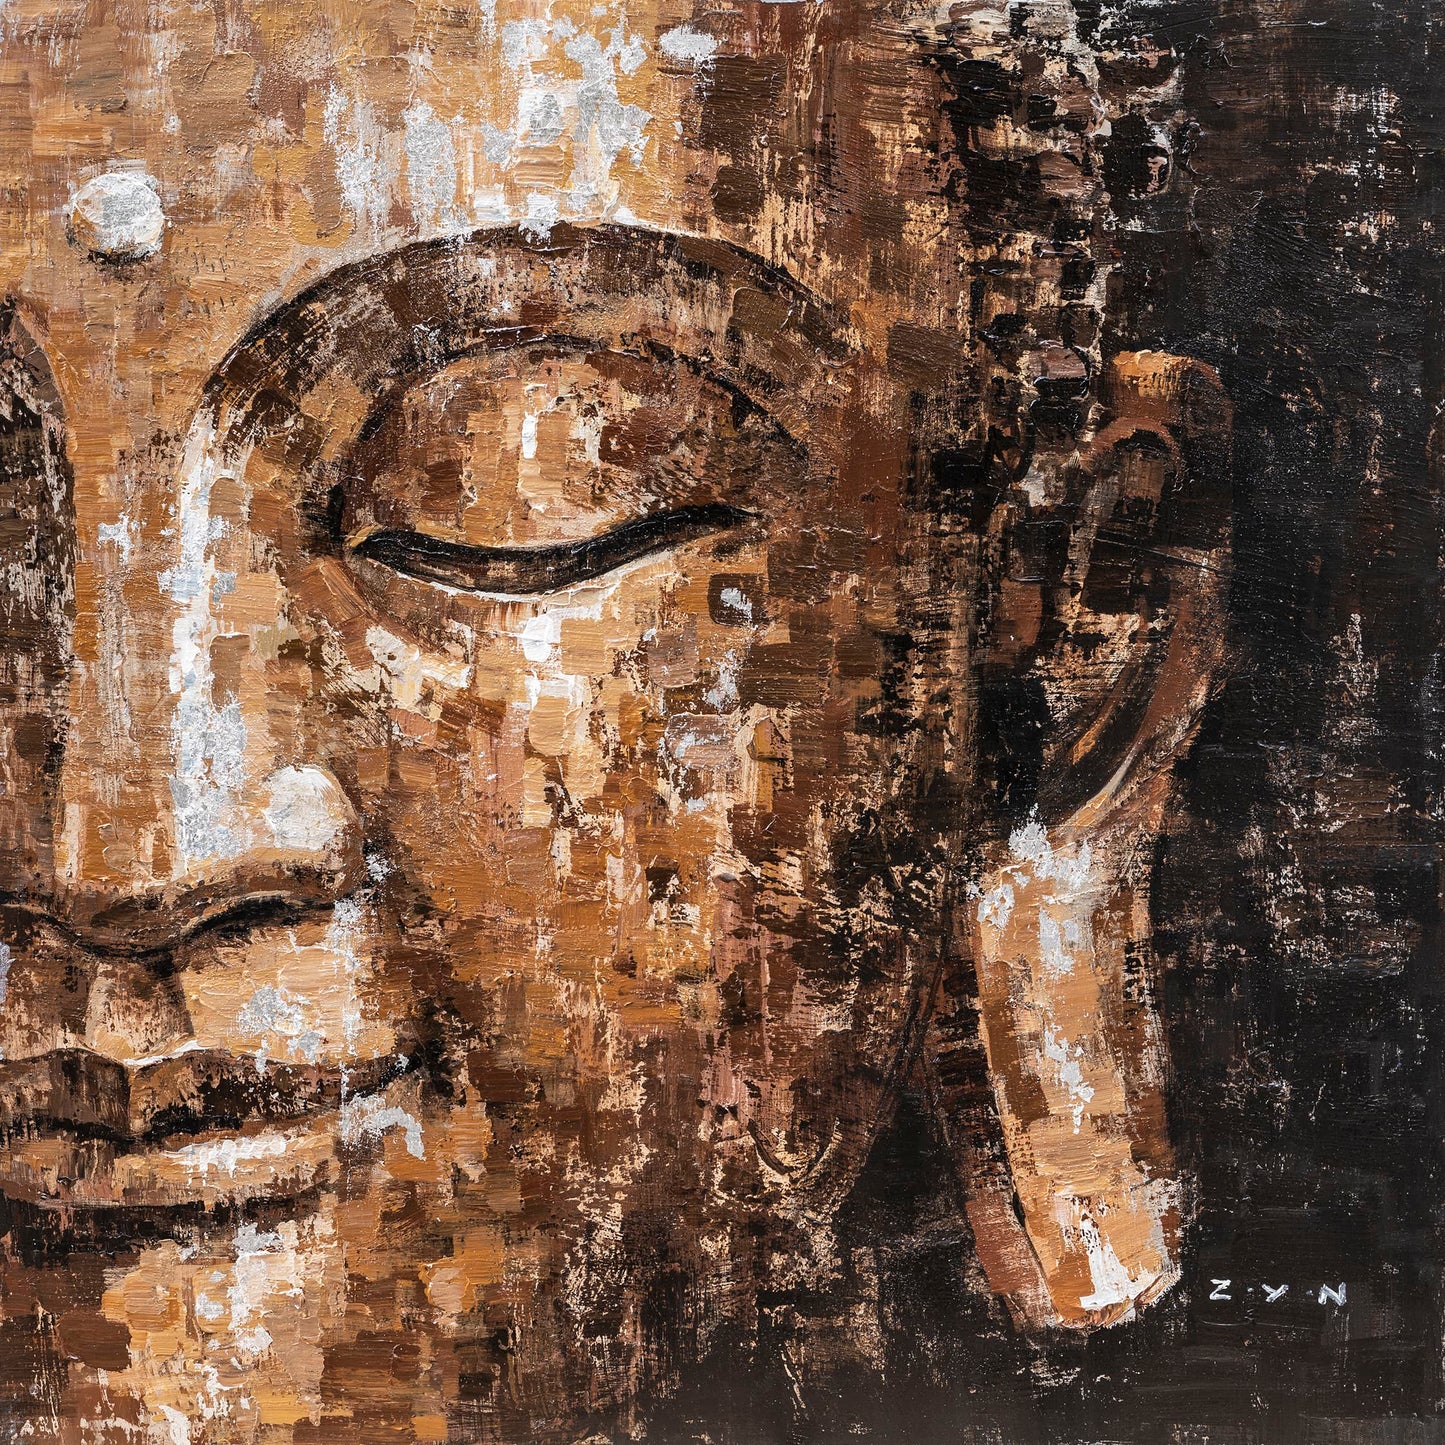 Hand-painted "Abstract Golden Buddha" Oil painting on canvas original, Canvas Wall art, wall decor - Wrapped Canvas Painting